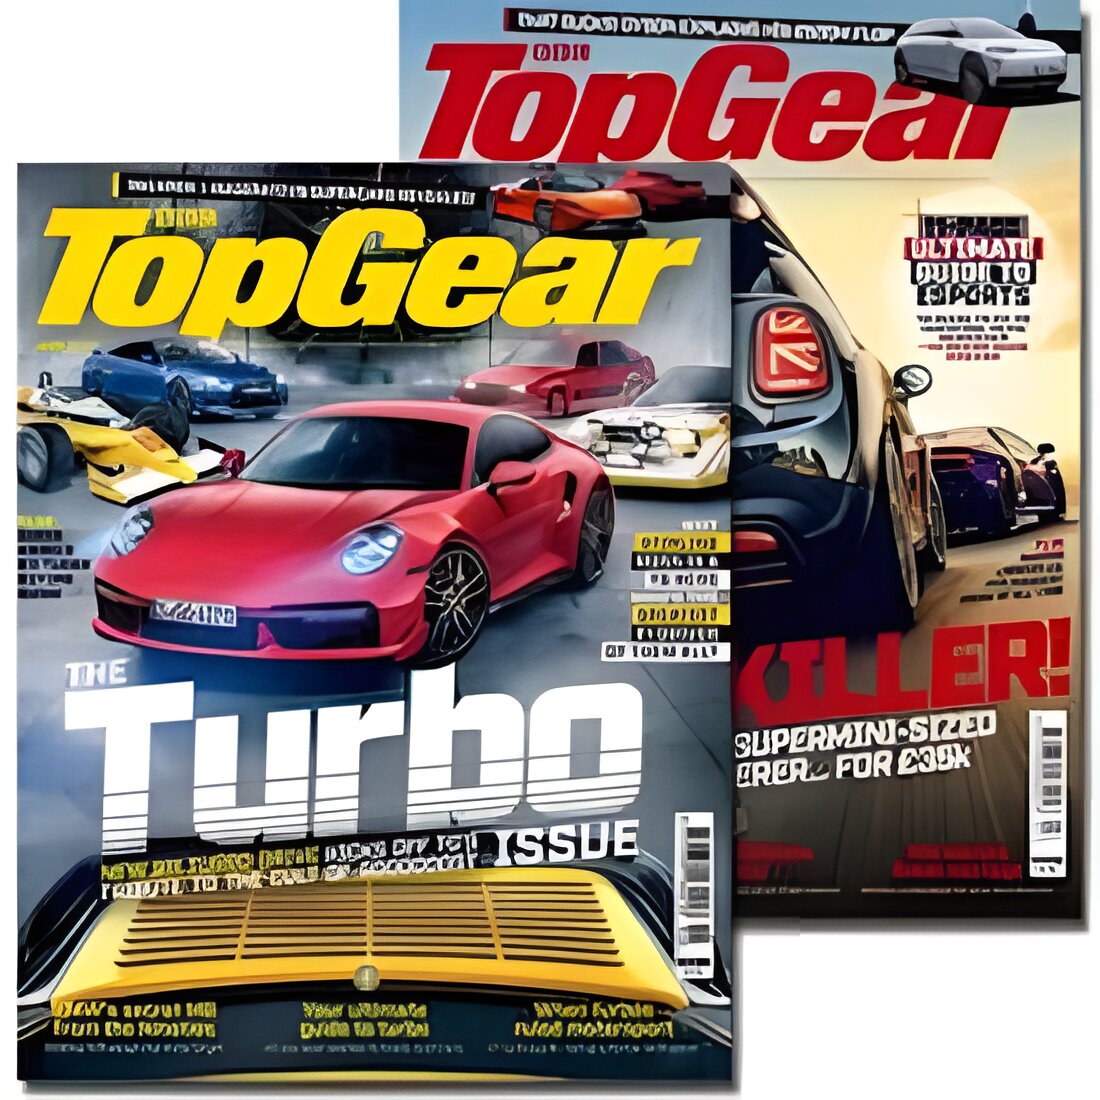 Free Issue of BBC Top Gear Magazine